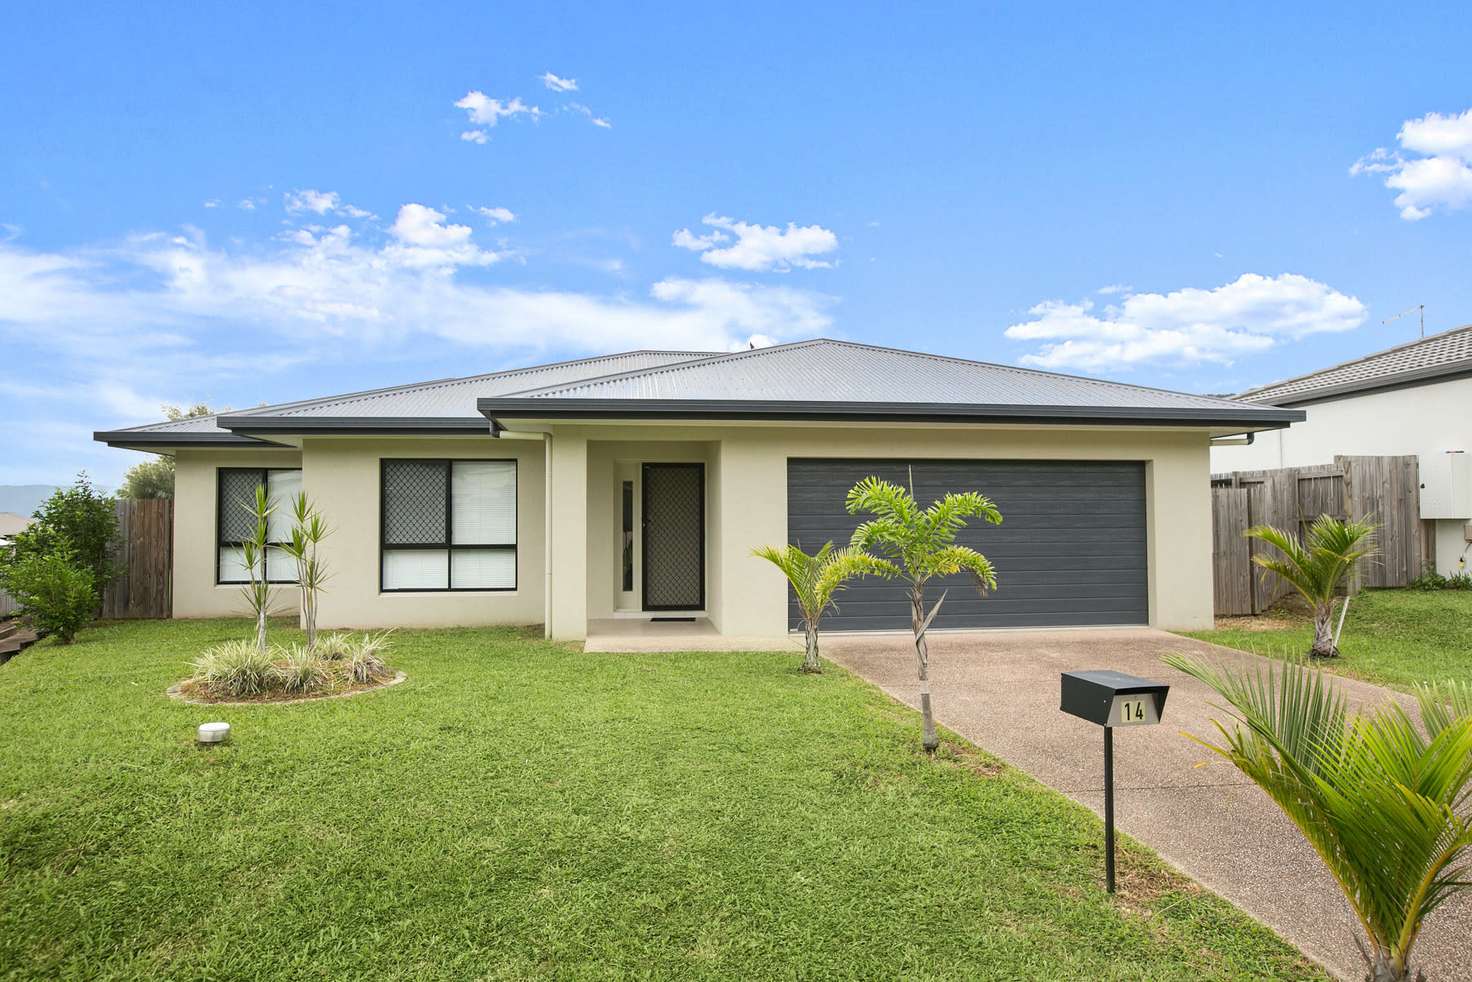 Main view of Homely house listing, 14 Tyenna Close, Bentley Park QLD 4869